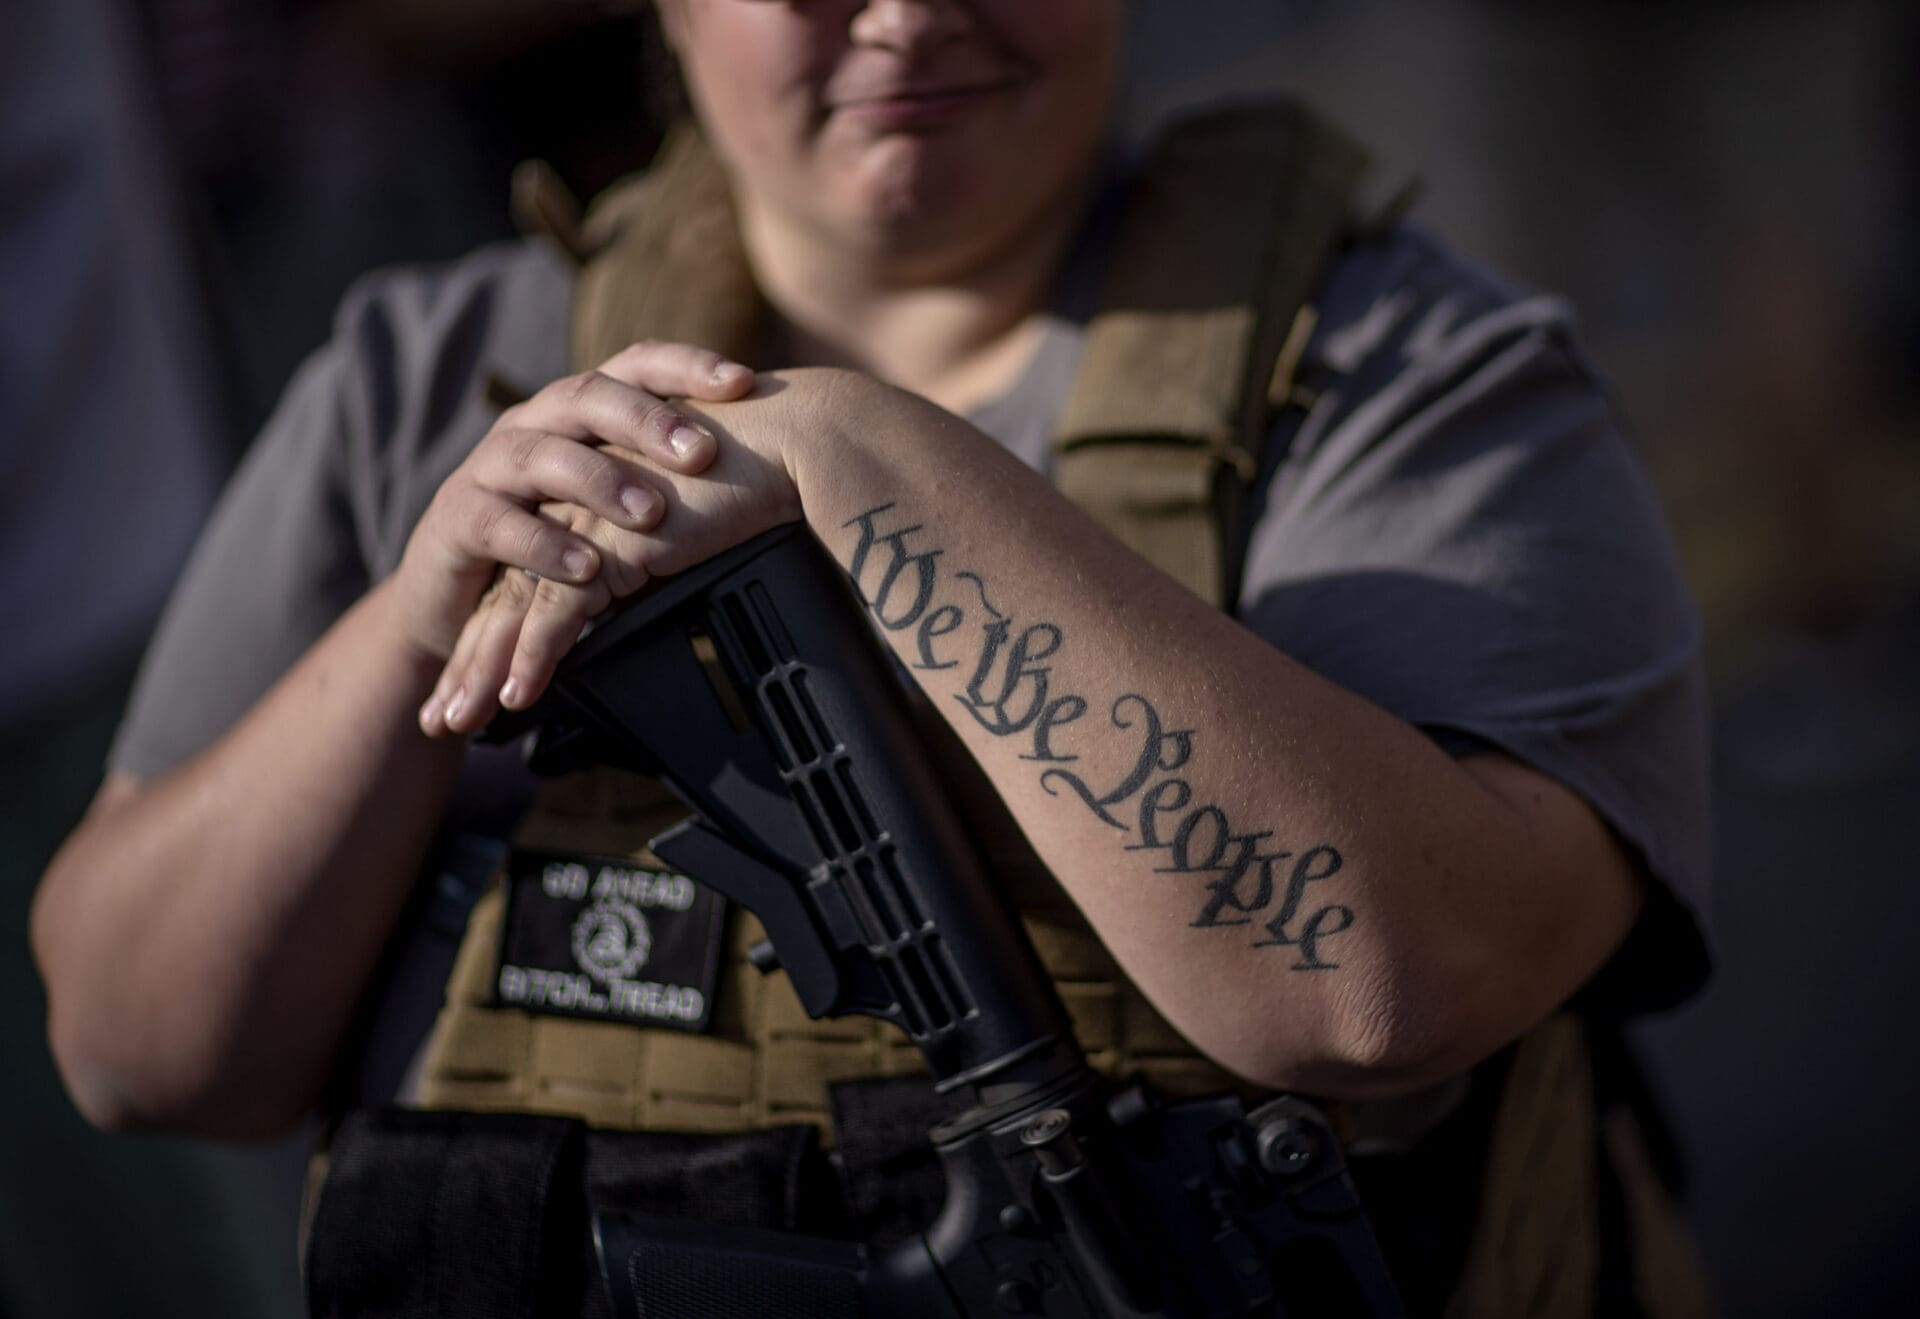 We the people tattoo ar-15 protest